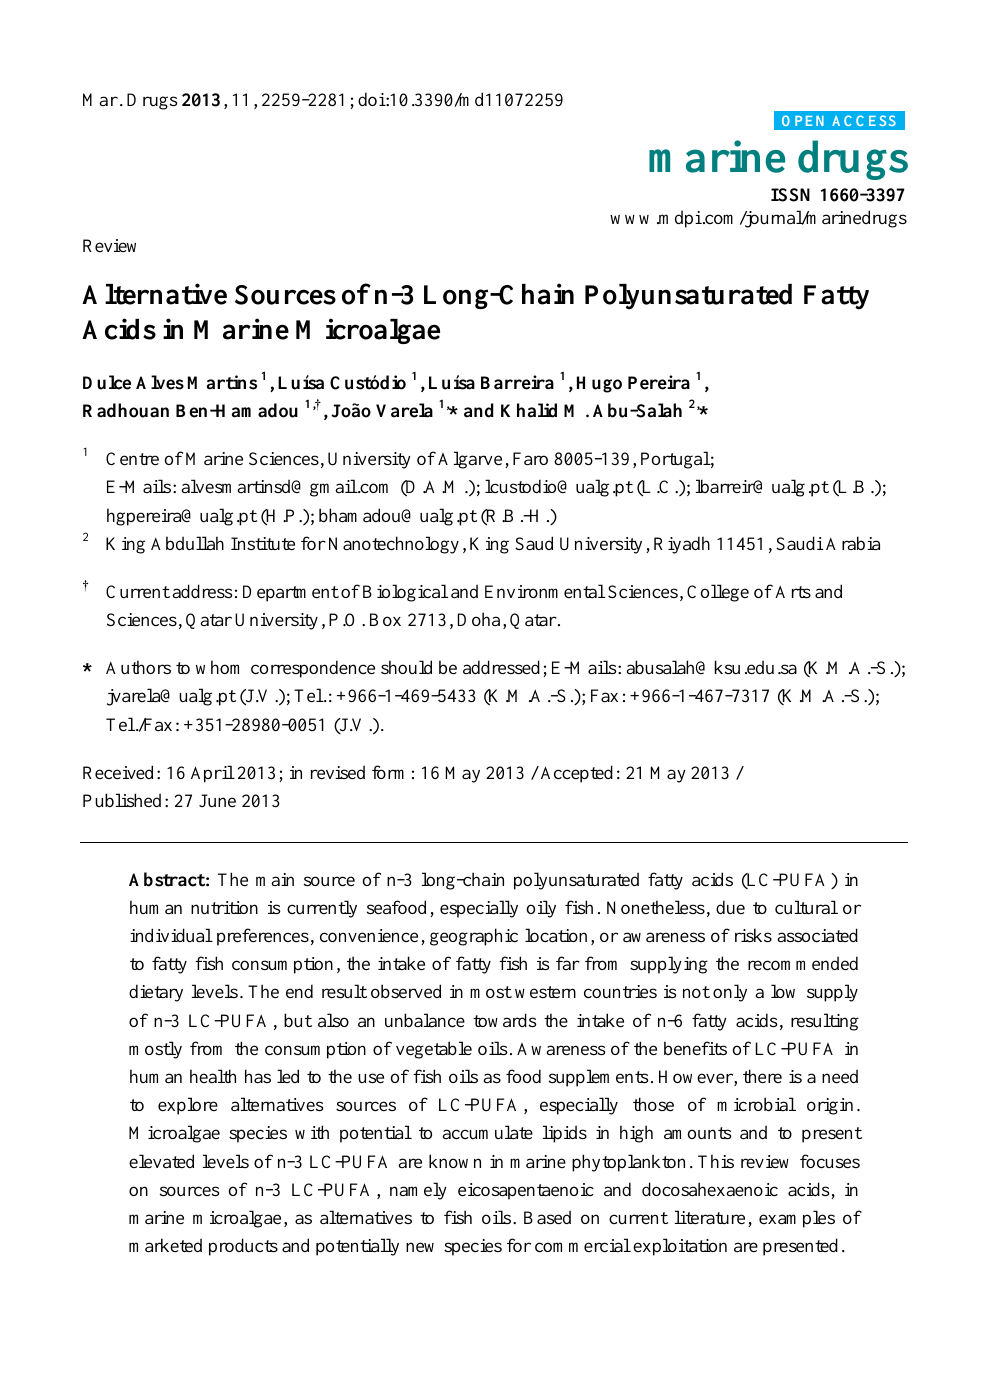 Alternative Sources Of N 3 Long Chain Polyunsaturated Fatty Acids In Marine Microalgae Topic Of Research Paper In Chemical Sciences Download Scholarly Article Pdf And Read For Free On Cyberleninka Open Science Hub